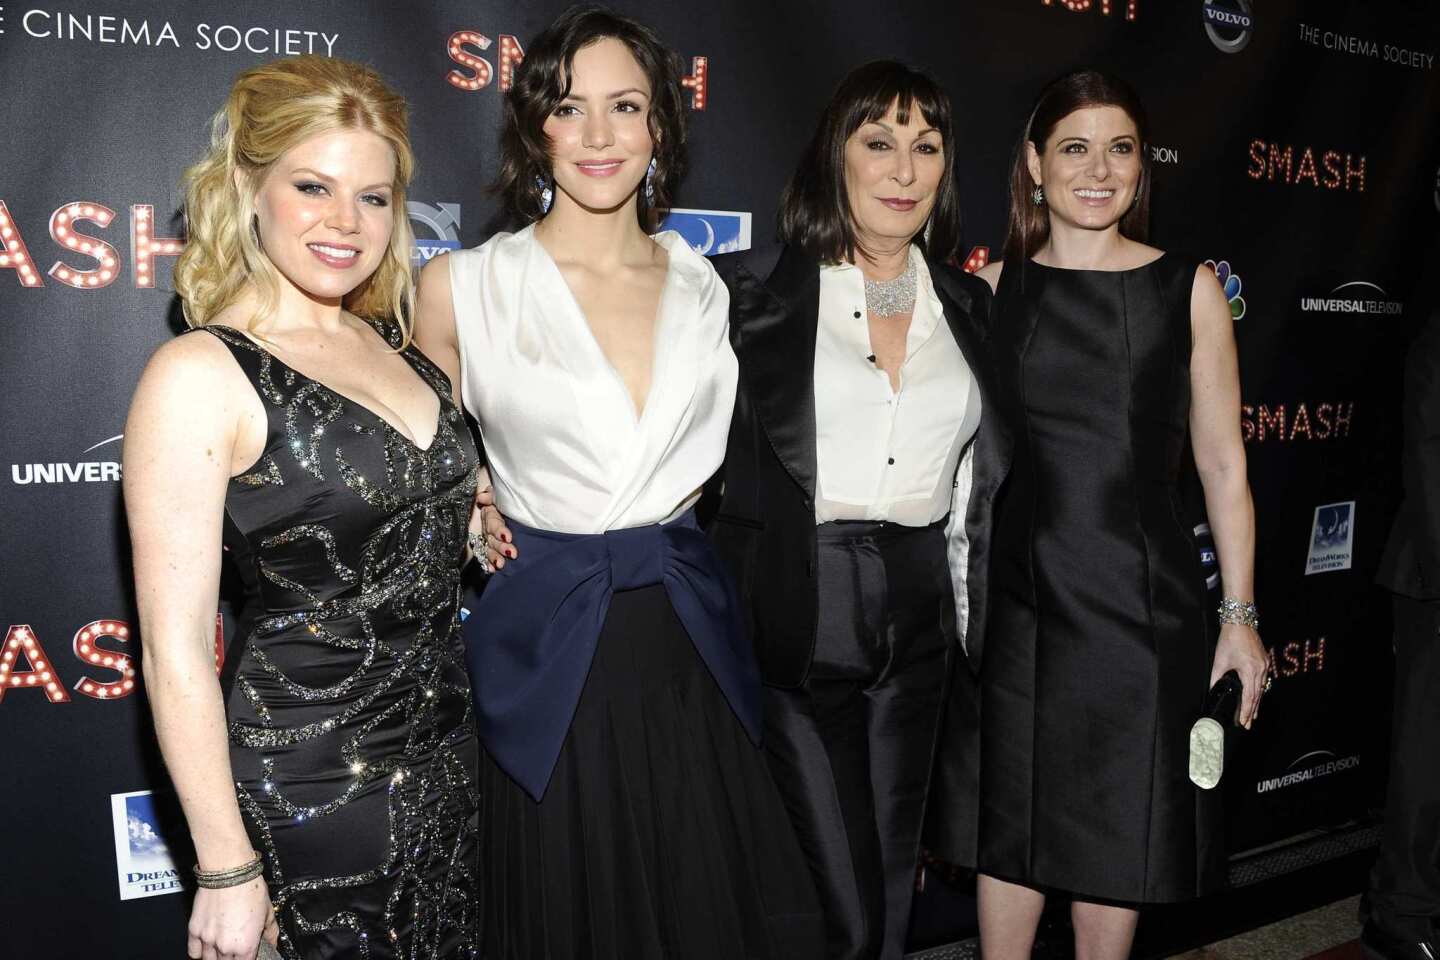 The cast of NBC's new show "Smash" gathered in New York on Thursday night to celebrate the musical drama's Feb. 6 debut. The show centers on competing Broadway hopefuls Karen Cartwright (Katharine McPhee) and Ivy Lynn (Megan Hilty) as they try out for the lead role in a new musical about Marilyn Monroe. From left, Hilty and McPhee with costars Angelica Huston and Debra Messing at the opening at the Metropolitan Museum of Art.